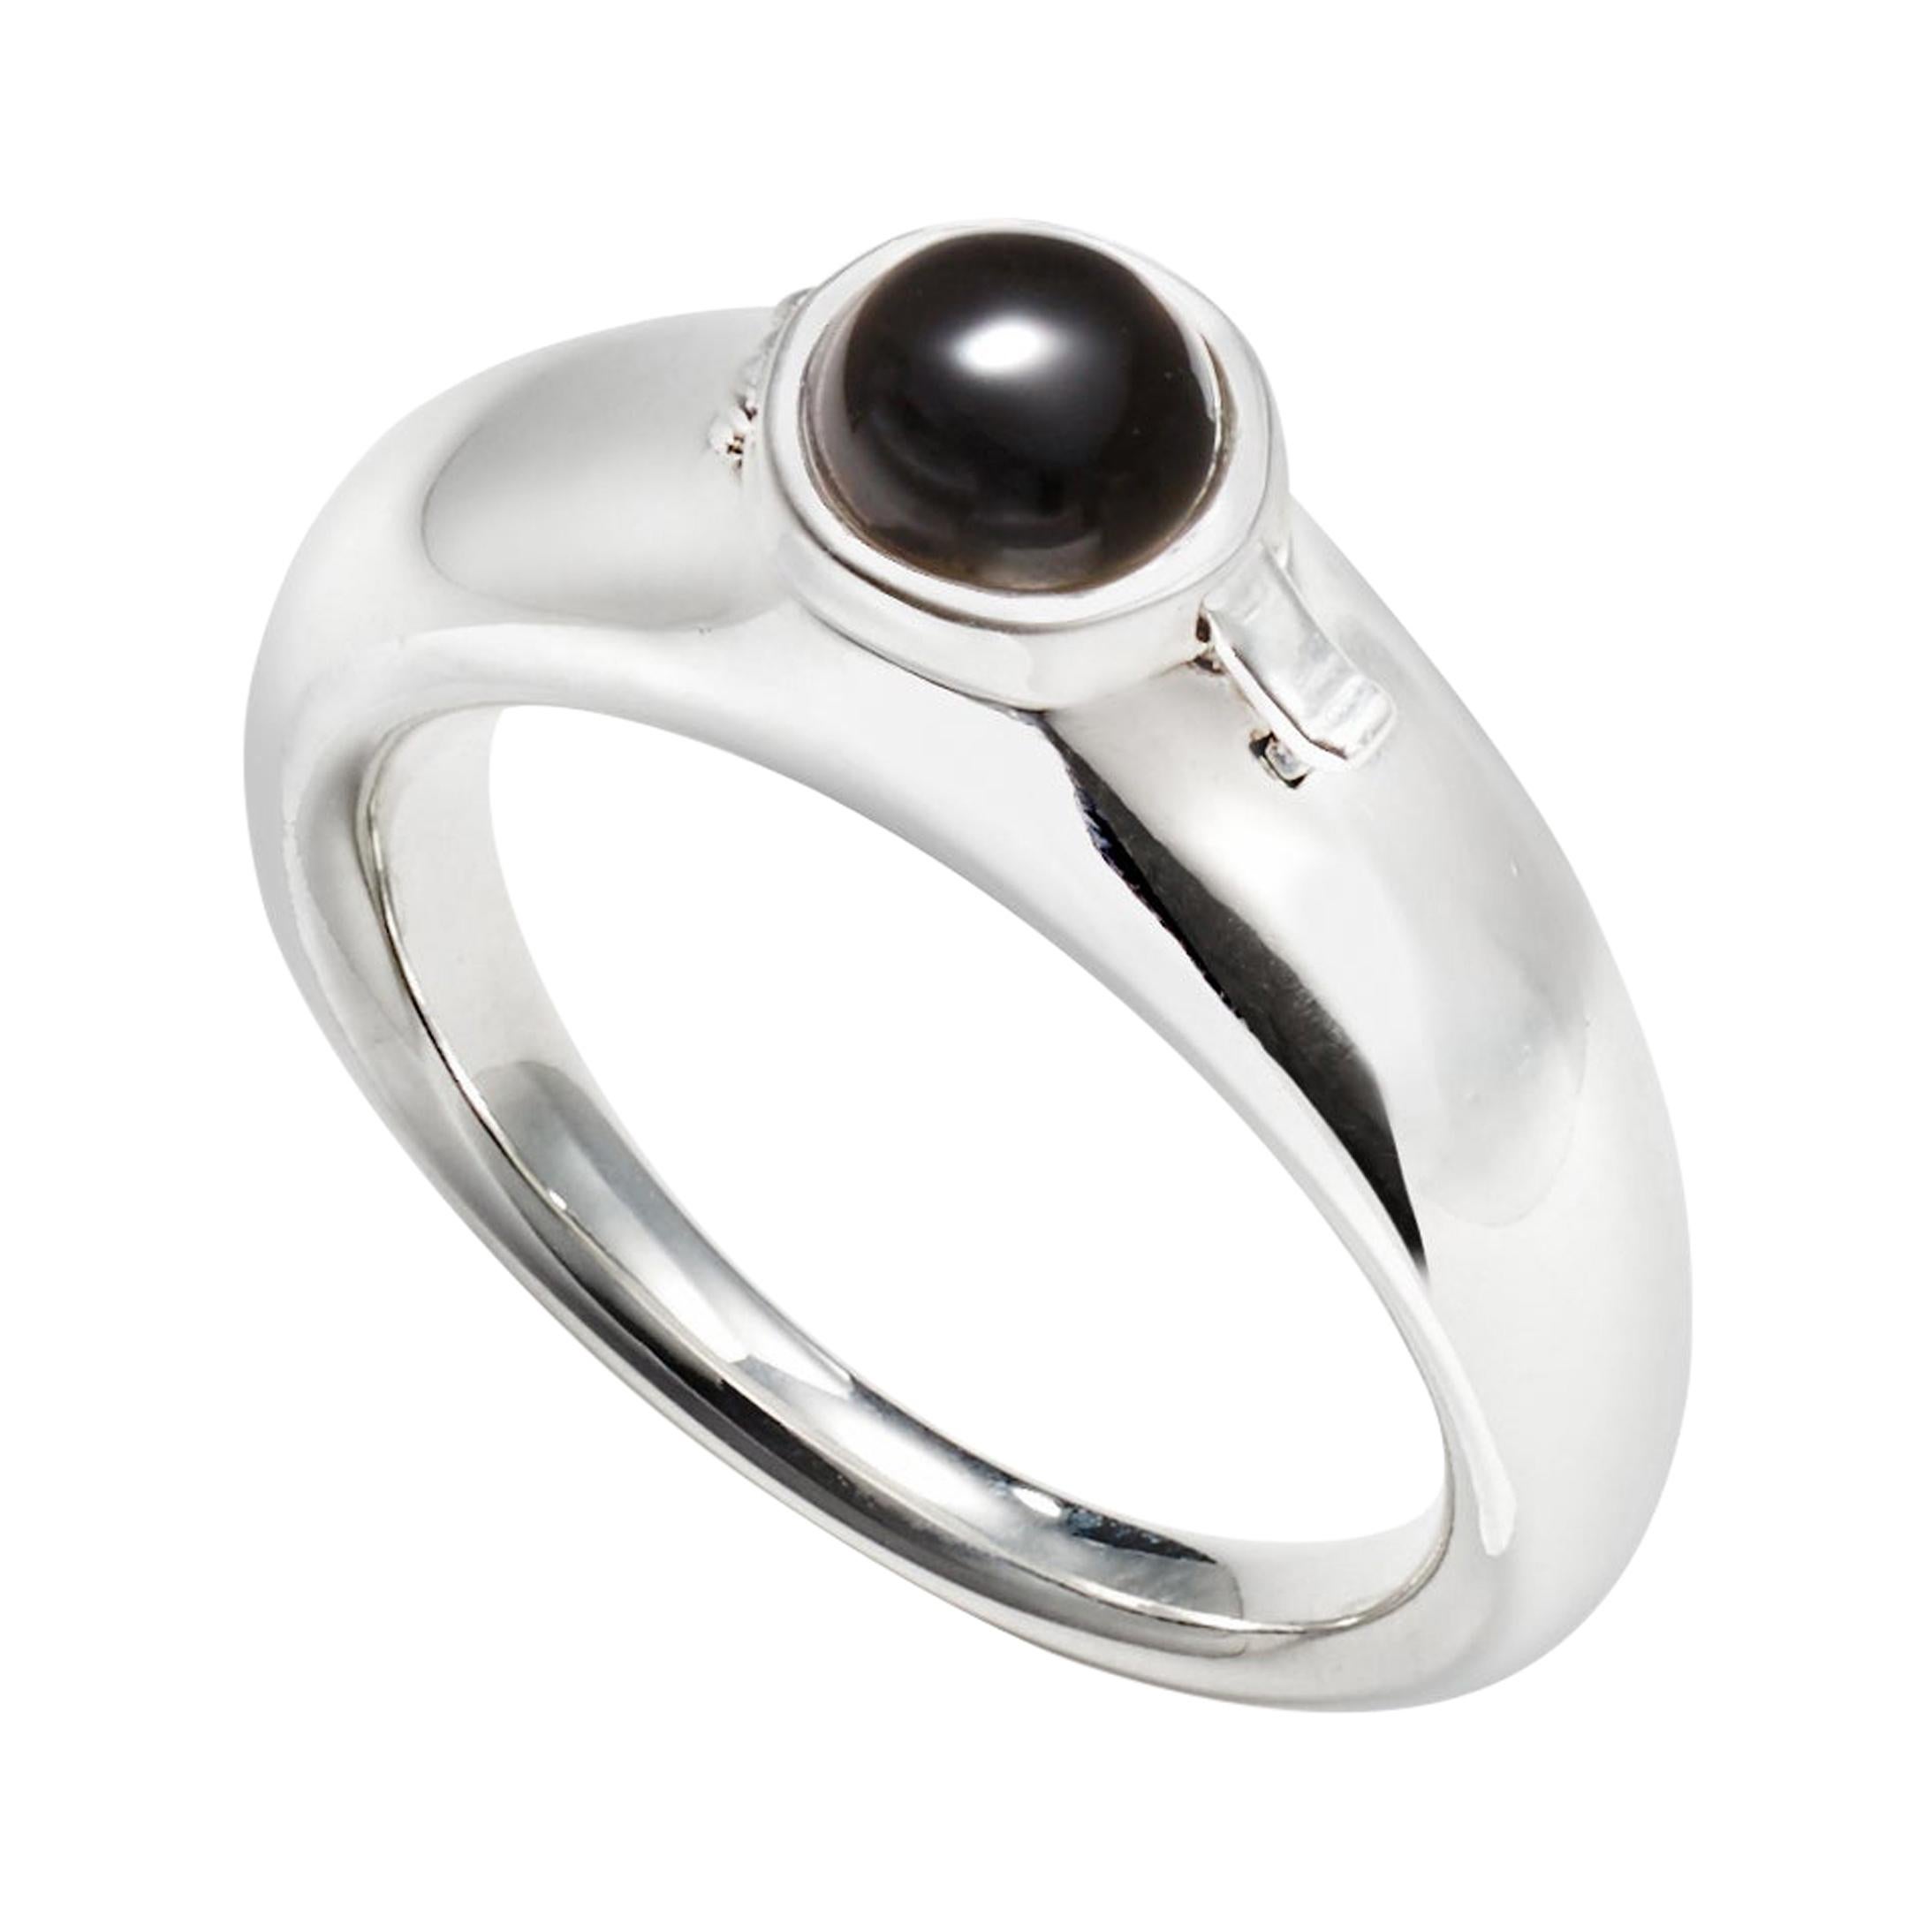 For Sale:  AGMES Sterling Silver Ring with Onyx Stone and Hidden Locket